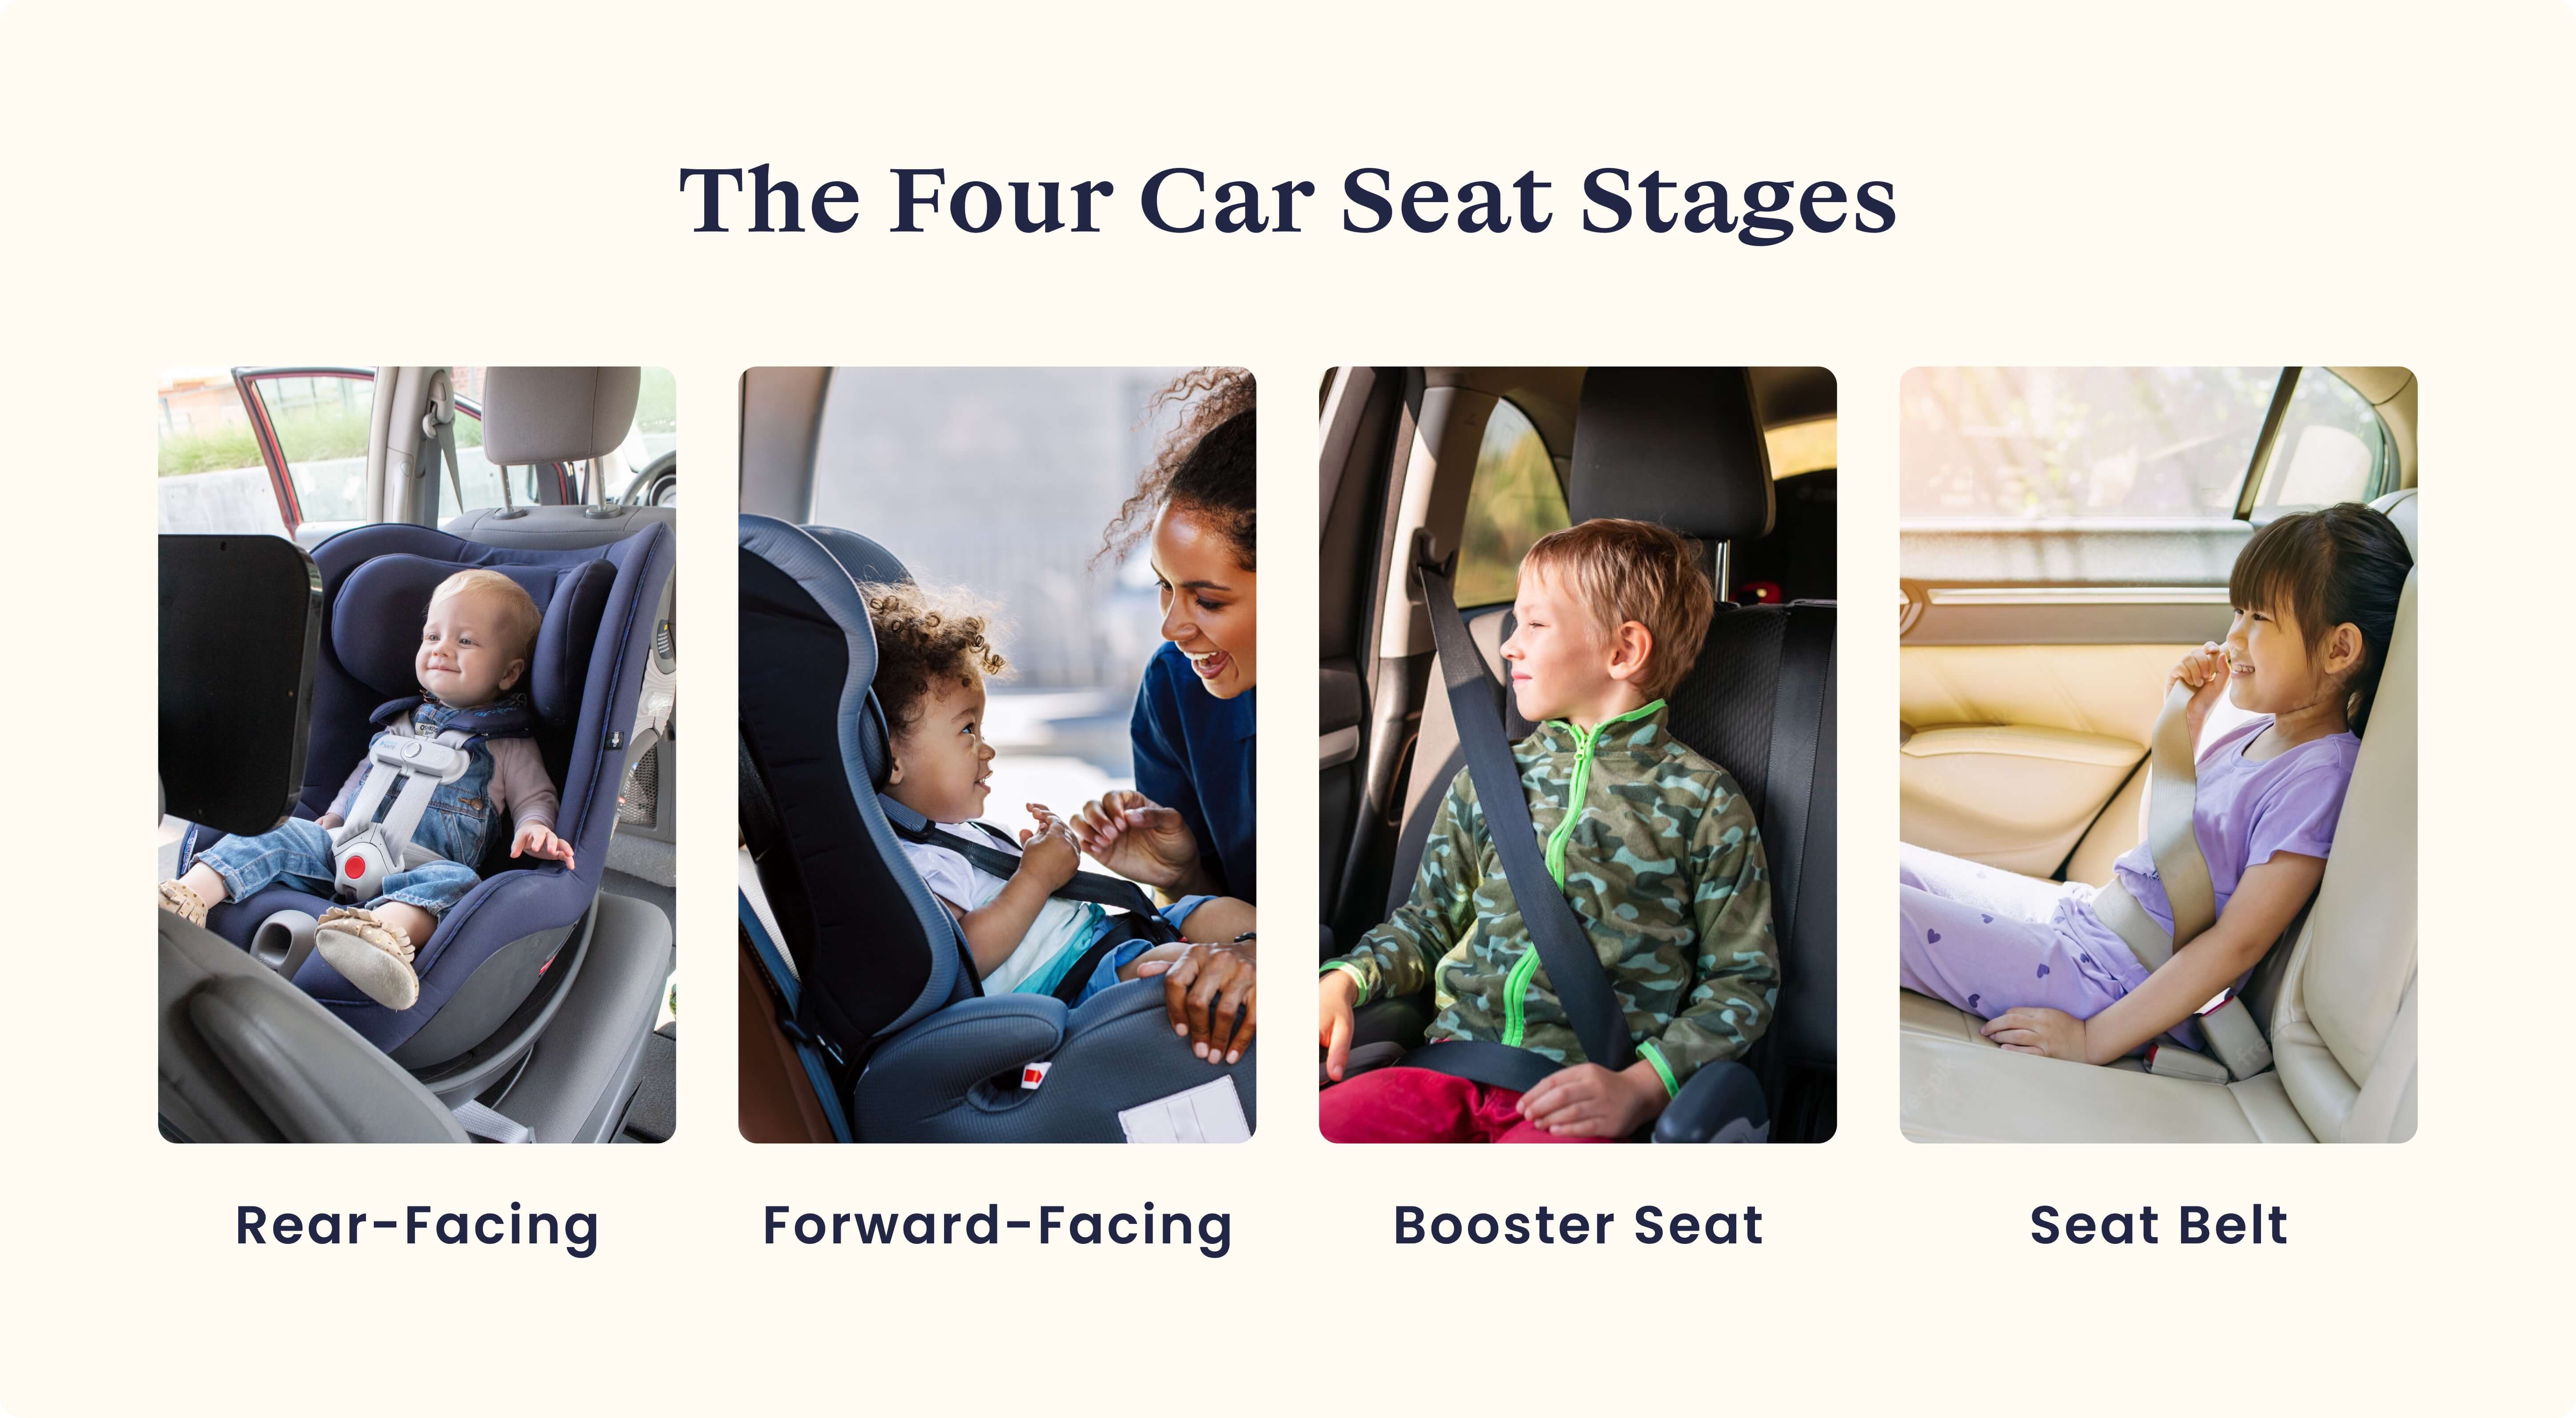 The four car seat stages with pictures for each stage